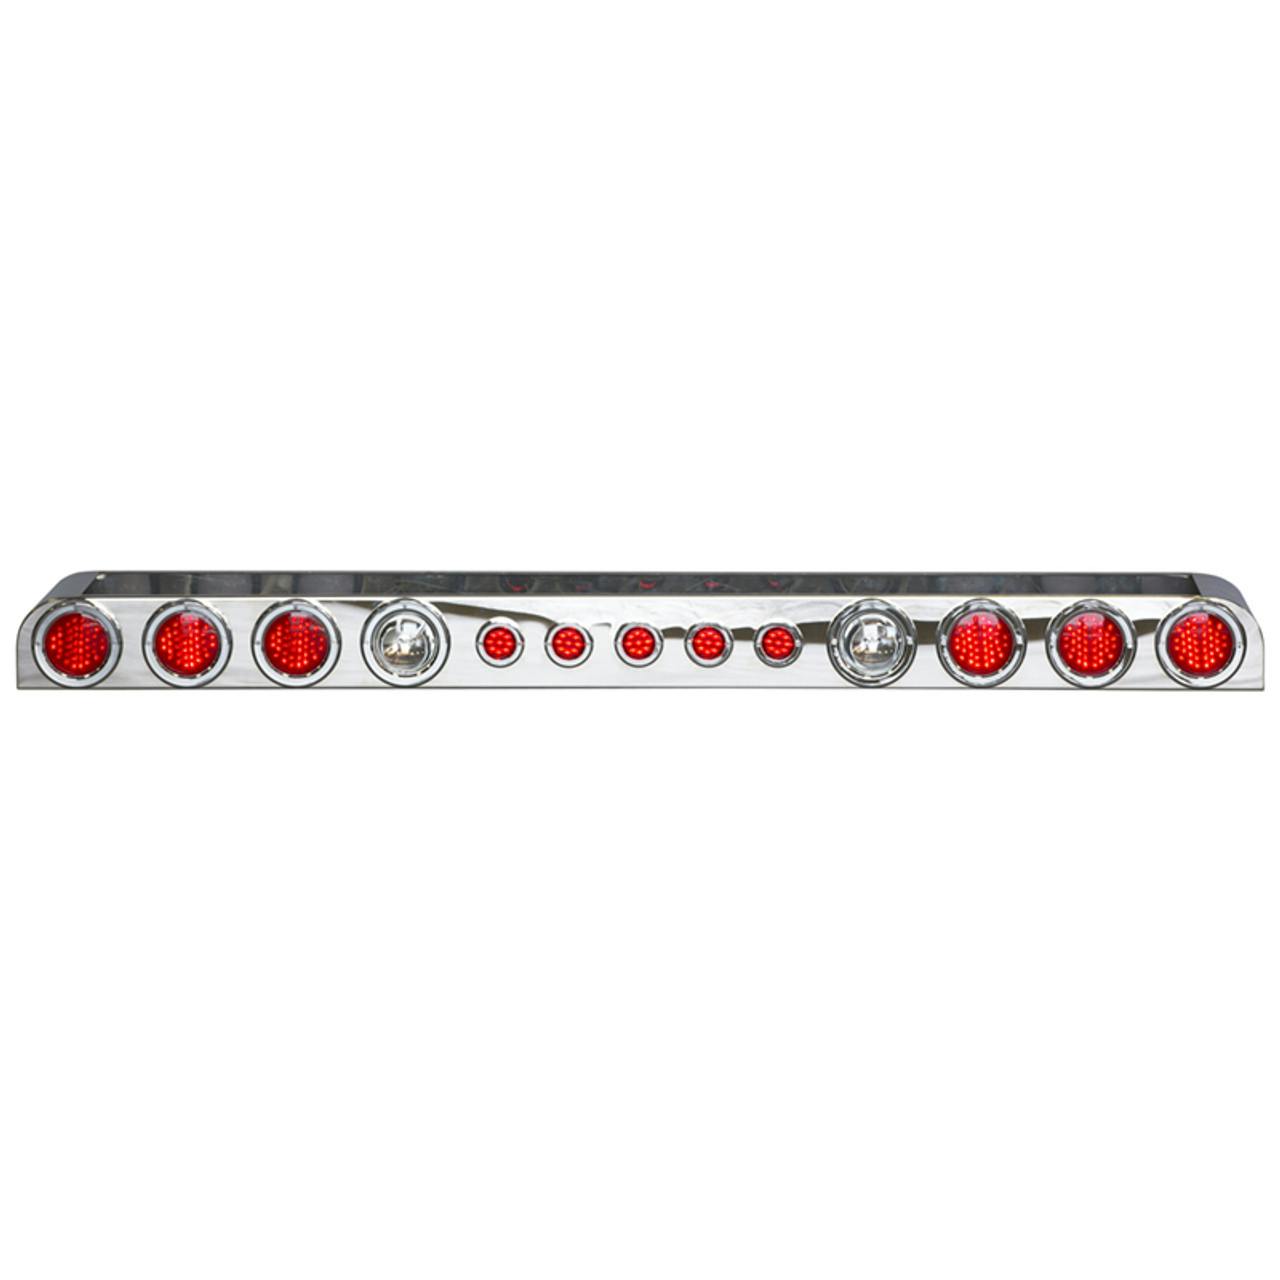 Rear Light Bar With Pre Drilled Mud Flap Flange By Brunner Fabrication Raneys Truck Parts 2015